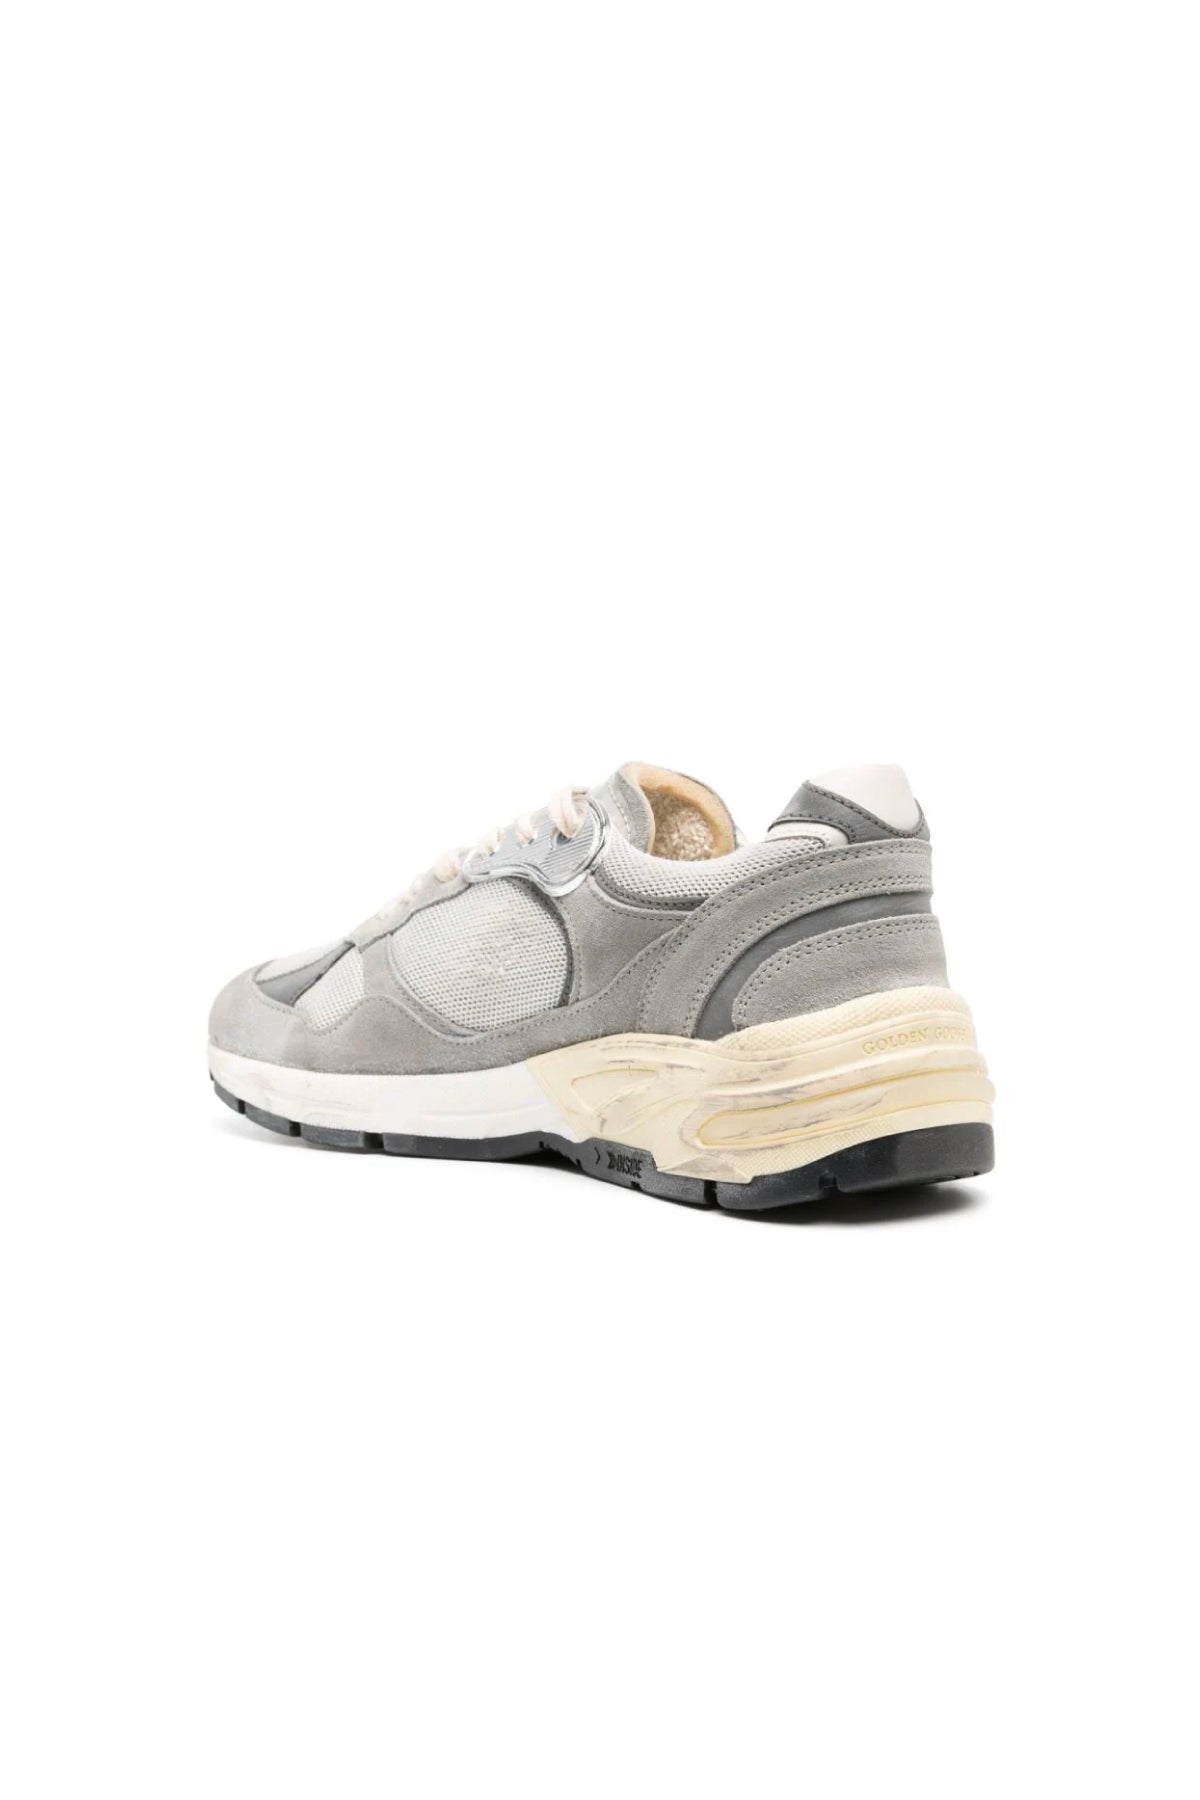 Golden Goose Running Dad Sneakers - Grey/ Silver/ White